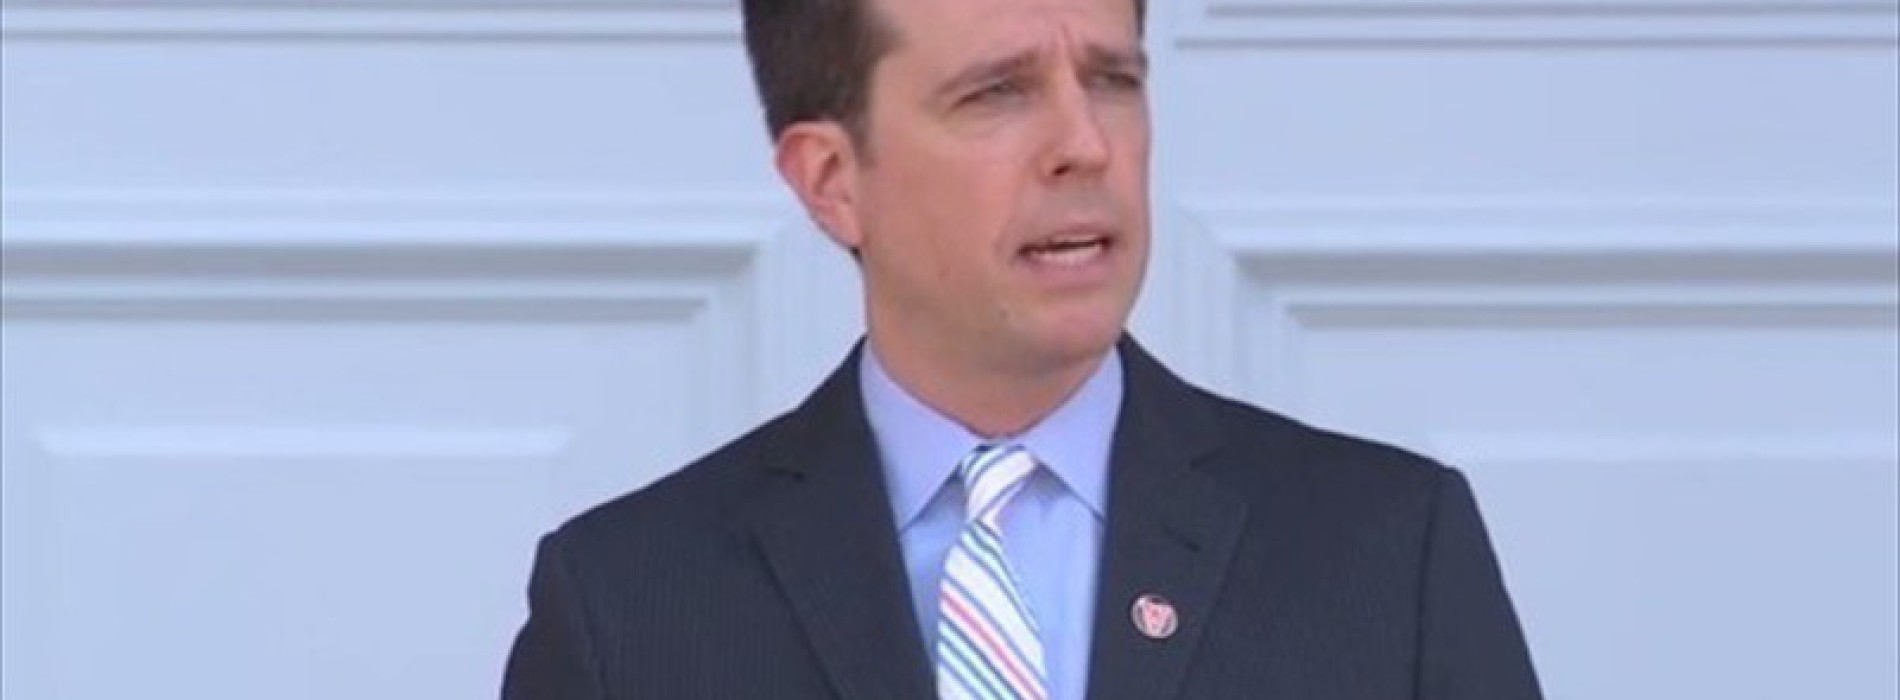 Actor Ed Helms delivers UVA commencement address, rips into Rolling Stone magazine